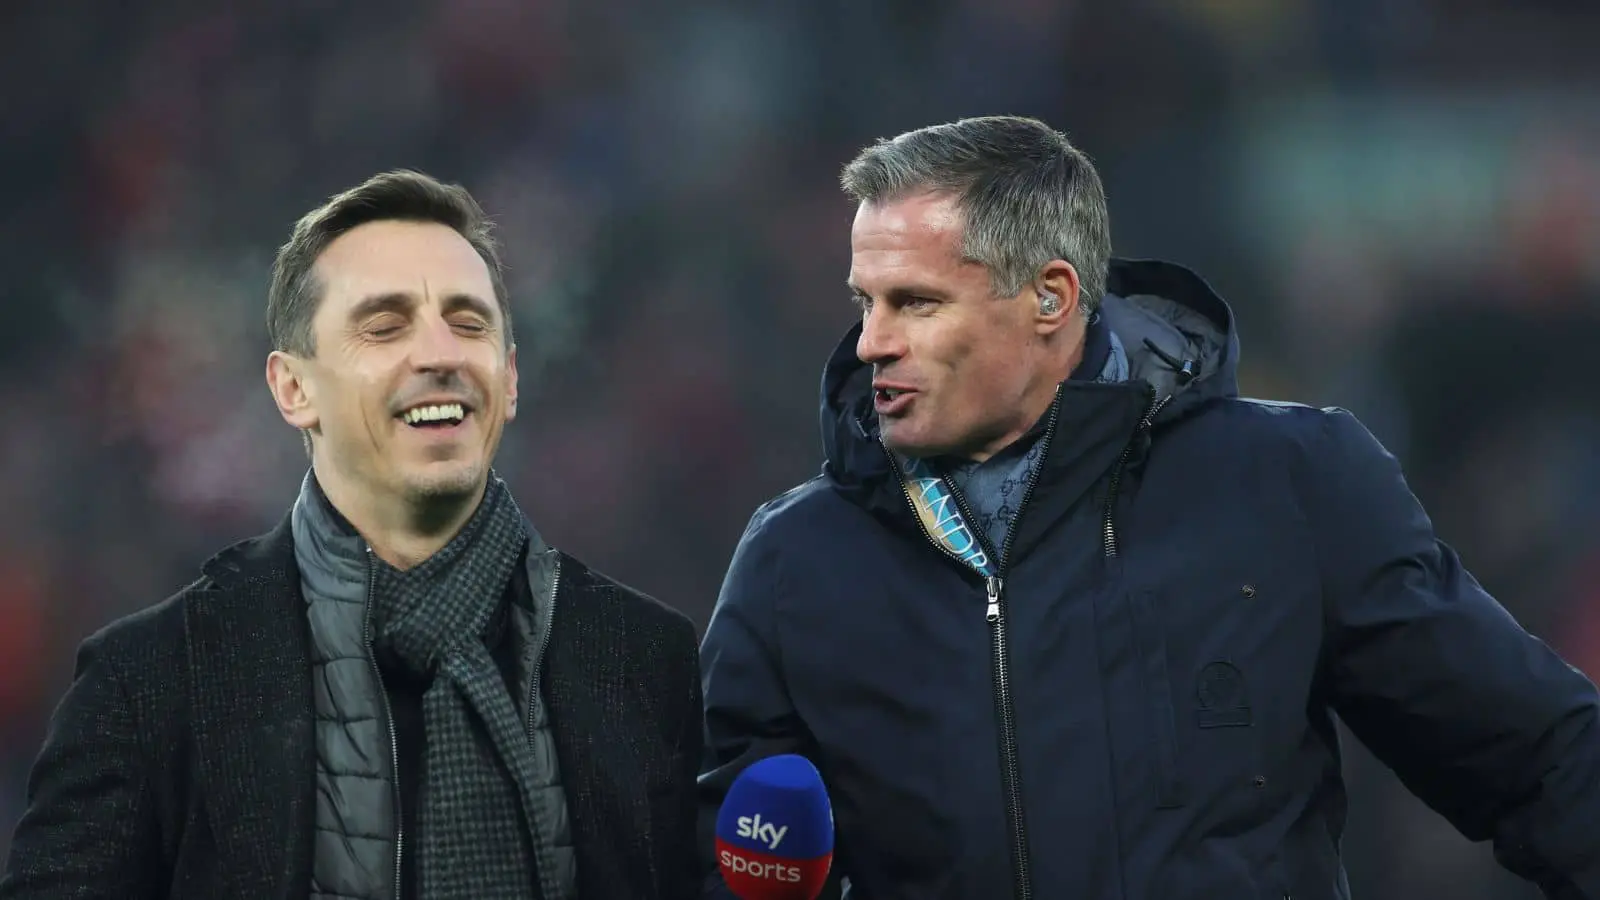 EPL: Neville, Carragher disagree over Player of the Season